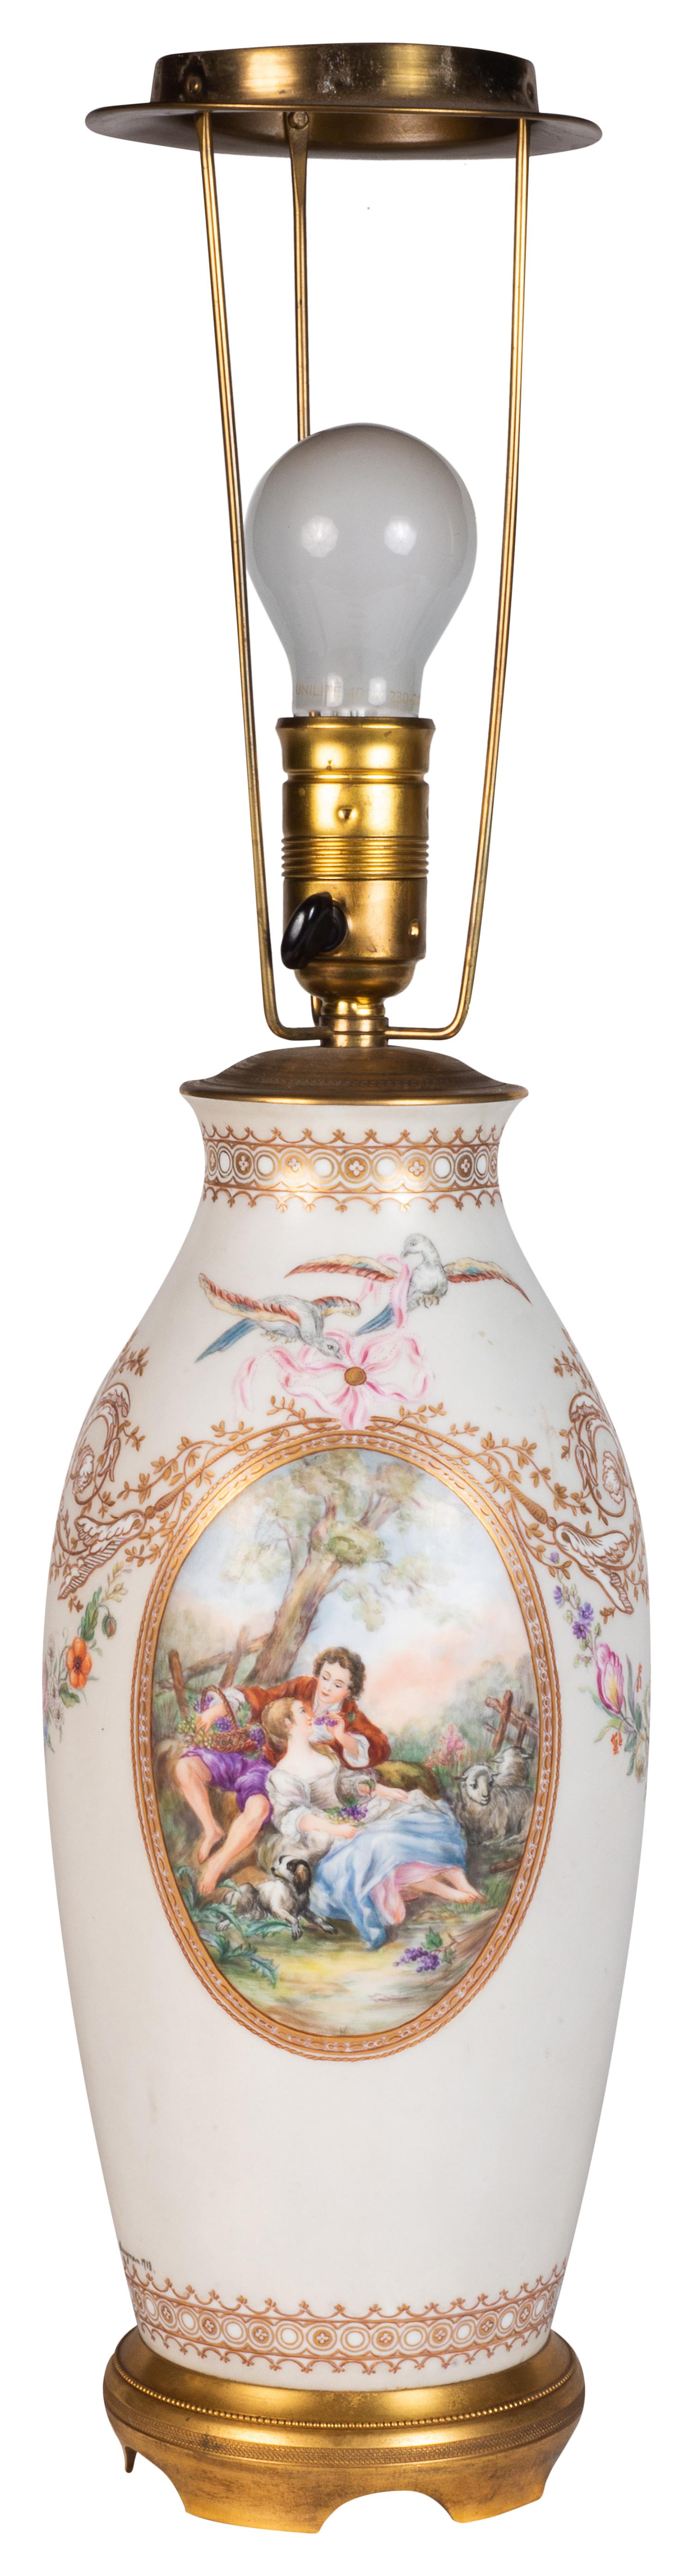 A fine quality late 19th Century French Paris porcelain hand painted vase / lamp. Having wonderful scrolling gilded decoration, with two oval panels depicting romantic scenes, raised on a gilded ormolu base.

Batch 74 N/H